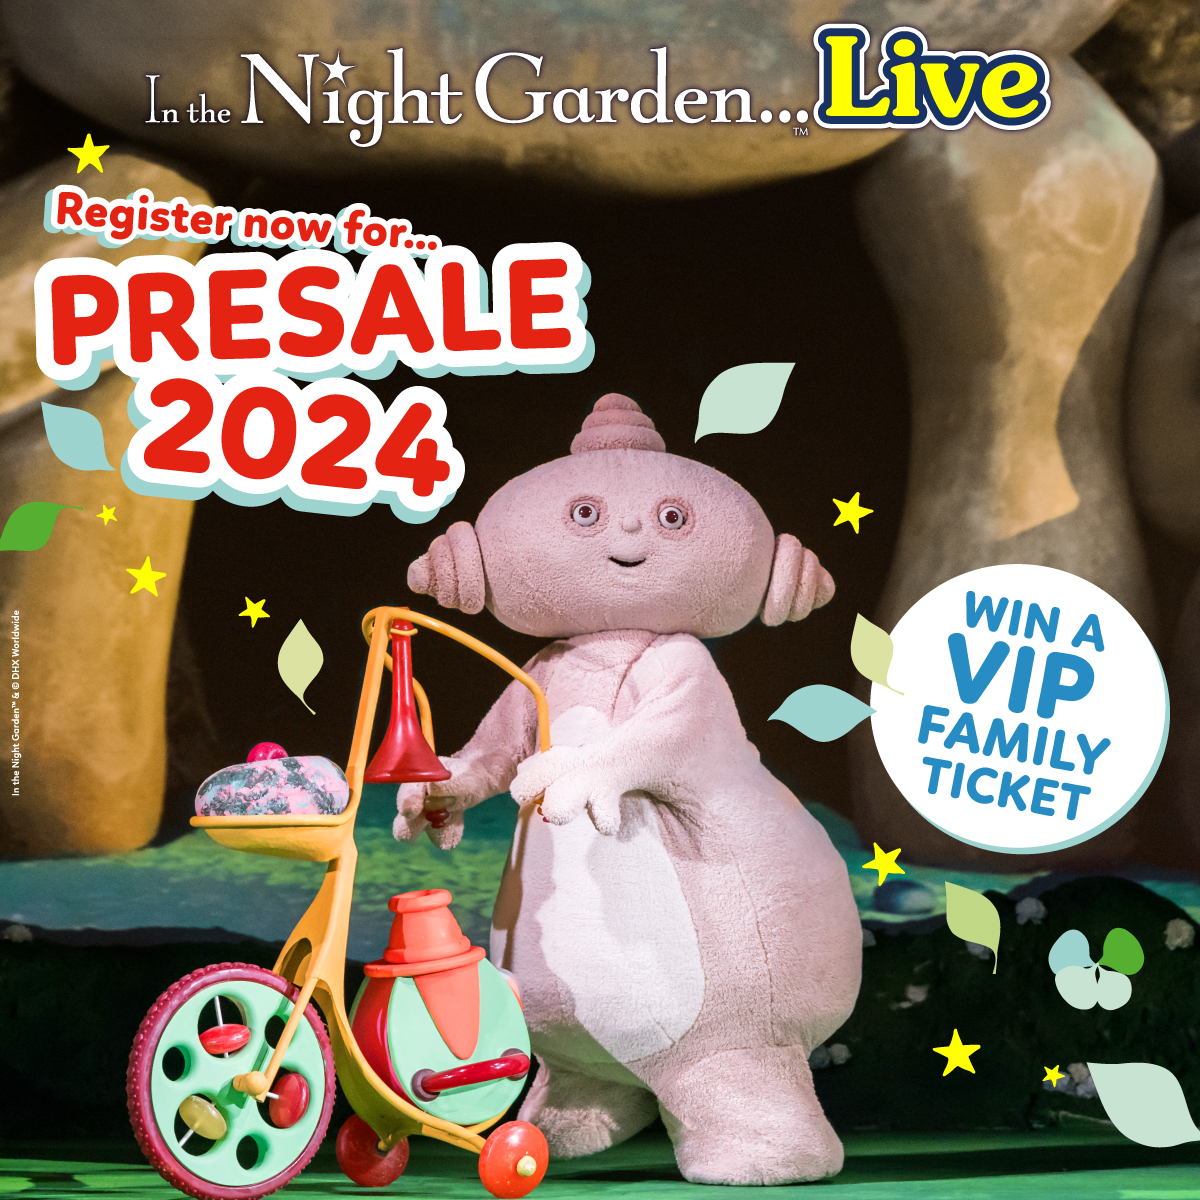 🔔 Registration for our exclusive #IntheNightGardenLive 2024 presale ends on Tue 23 Jan! That's next week, so remember to register at ➡️ NightGardenLive.com before it's too late. The sooner you register the earlier you will be able to book tickets in the 48hr presale.